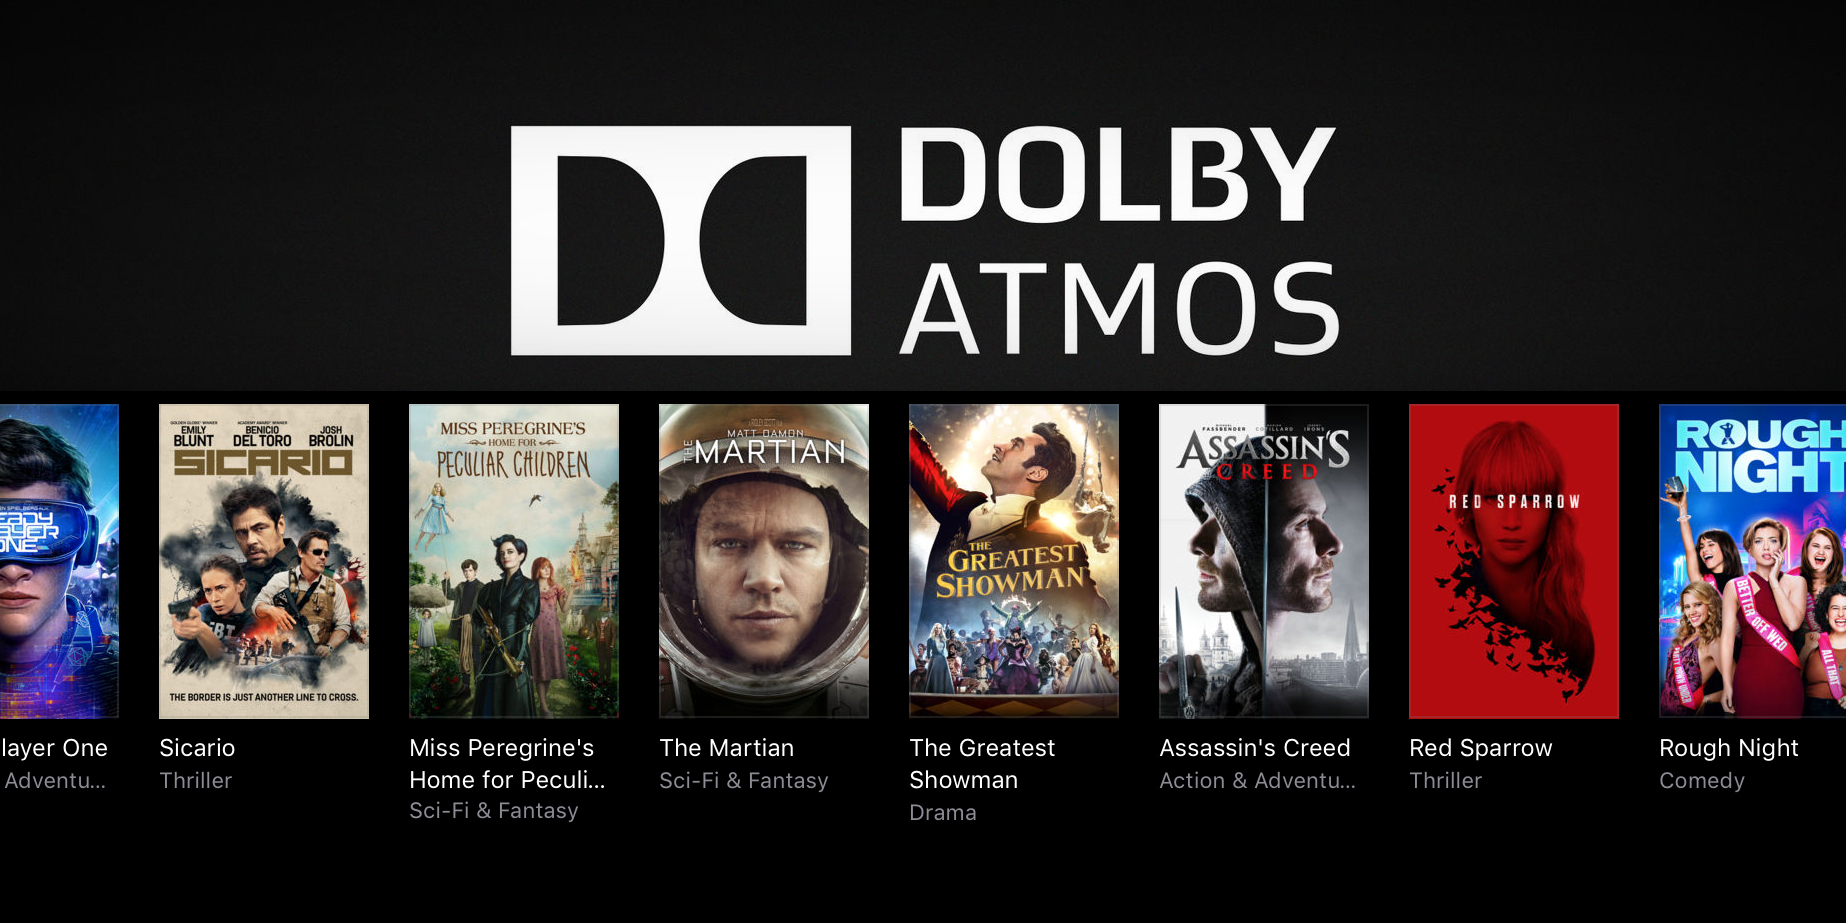 Meaning atmos cinema Dolby Atmos